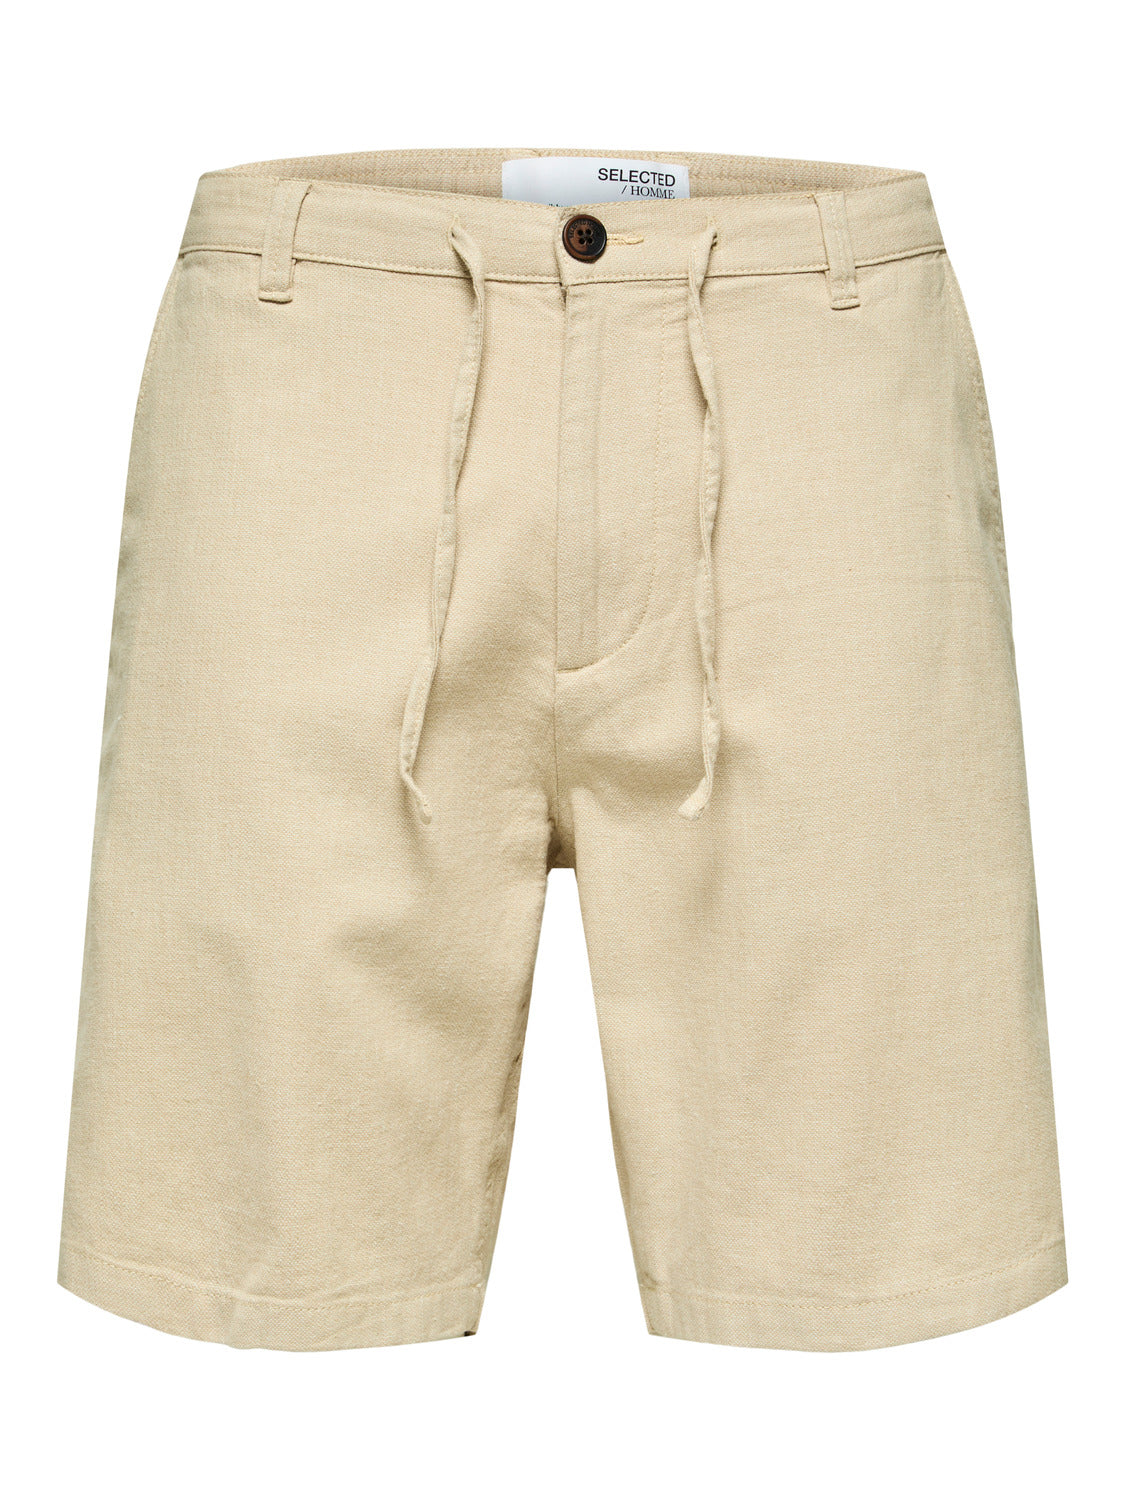 SELECTED HOMME - REGULAR-BRODY Shorts - Incense